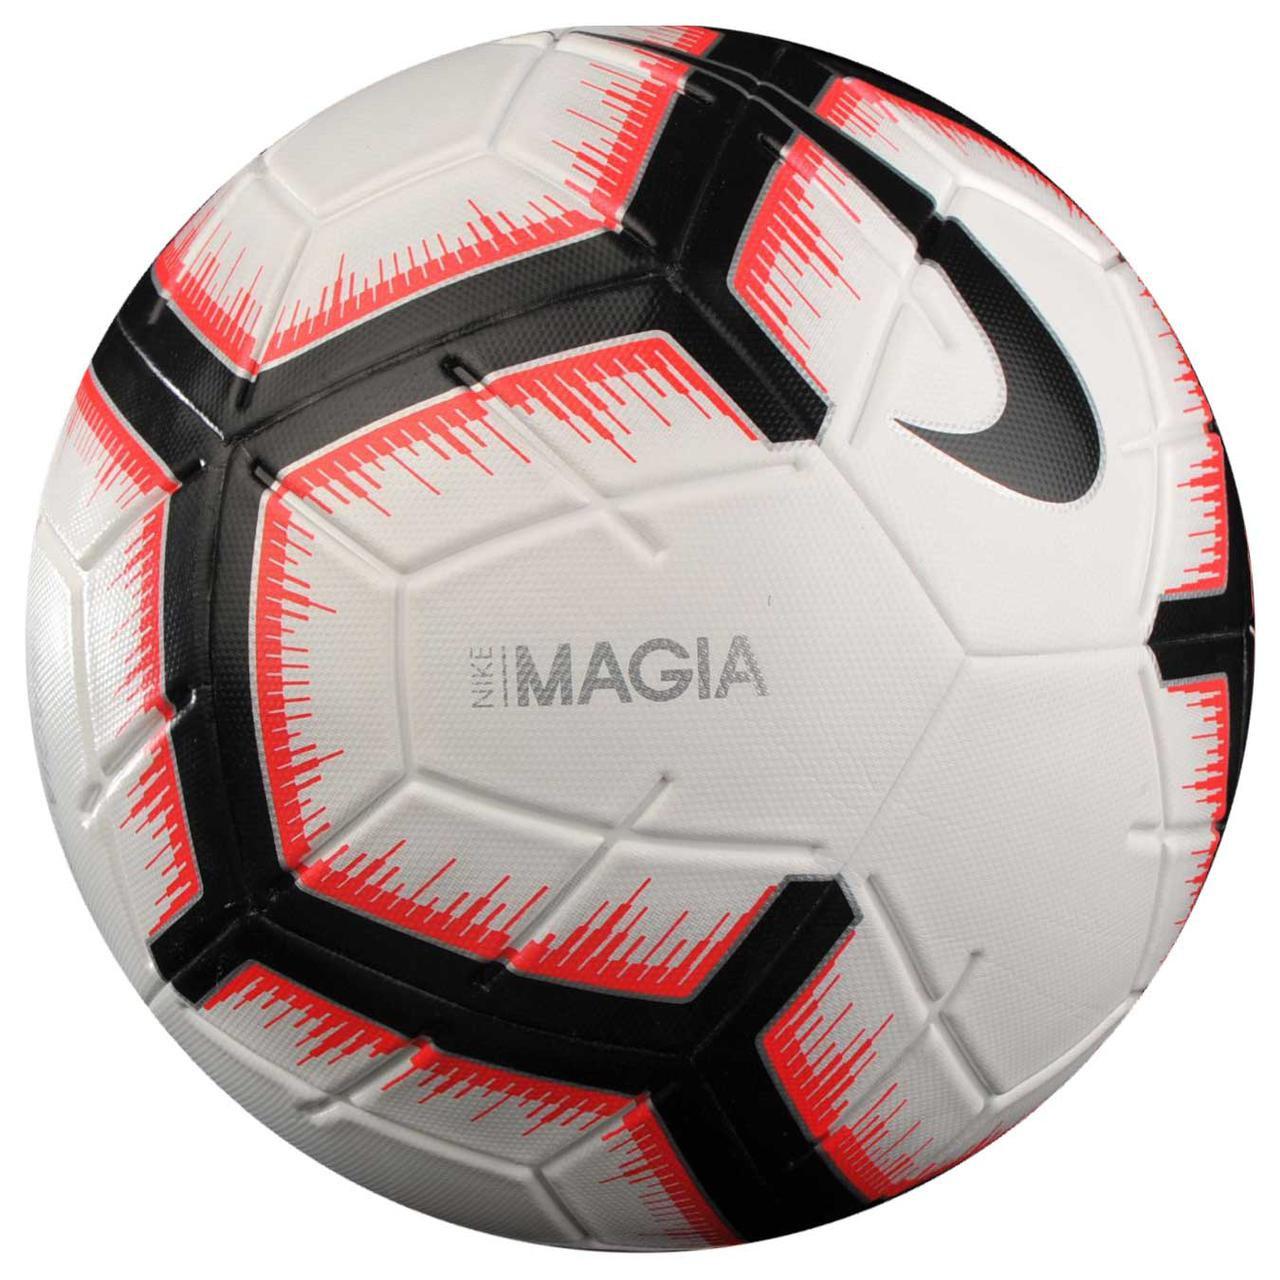 Nike Magia Fifa Quality Top Sellers, GET 52% OFF, www.rnrm.org.uk